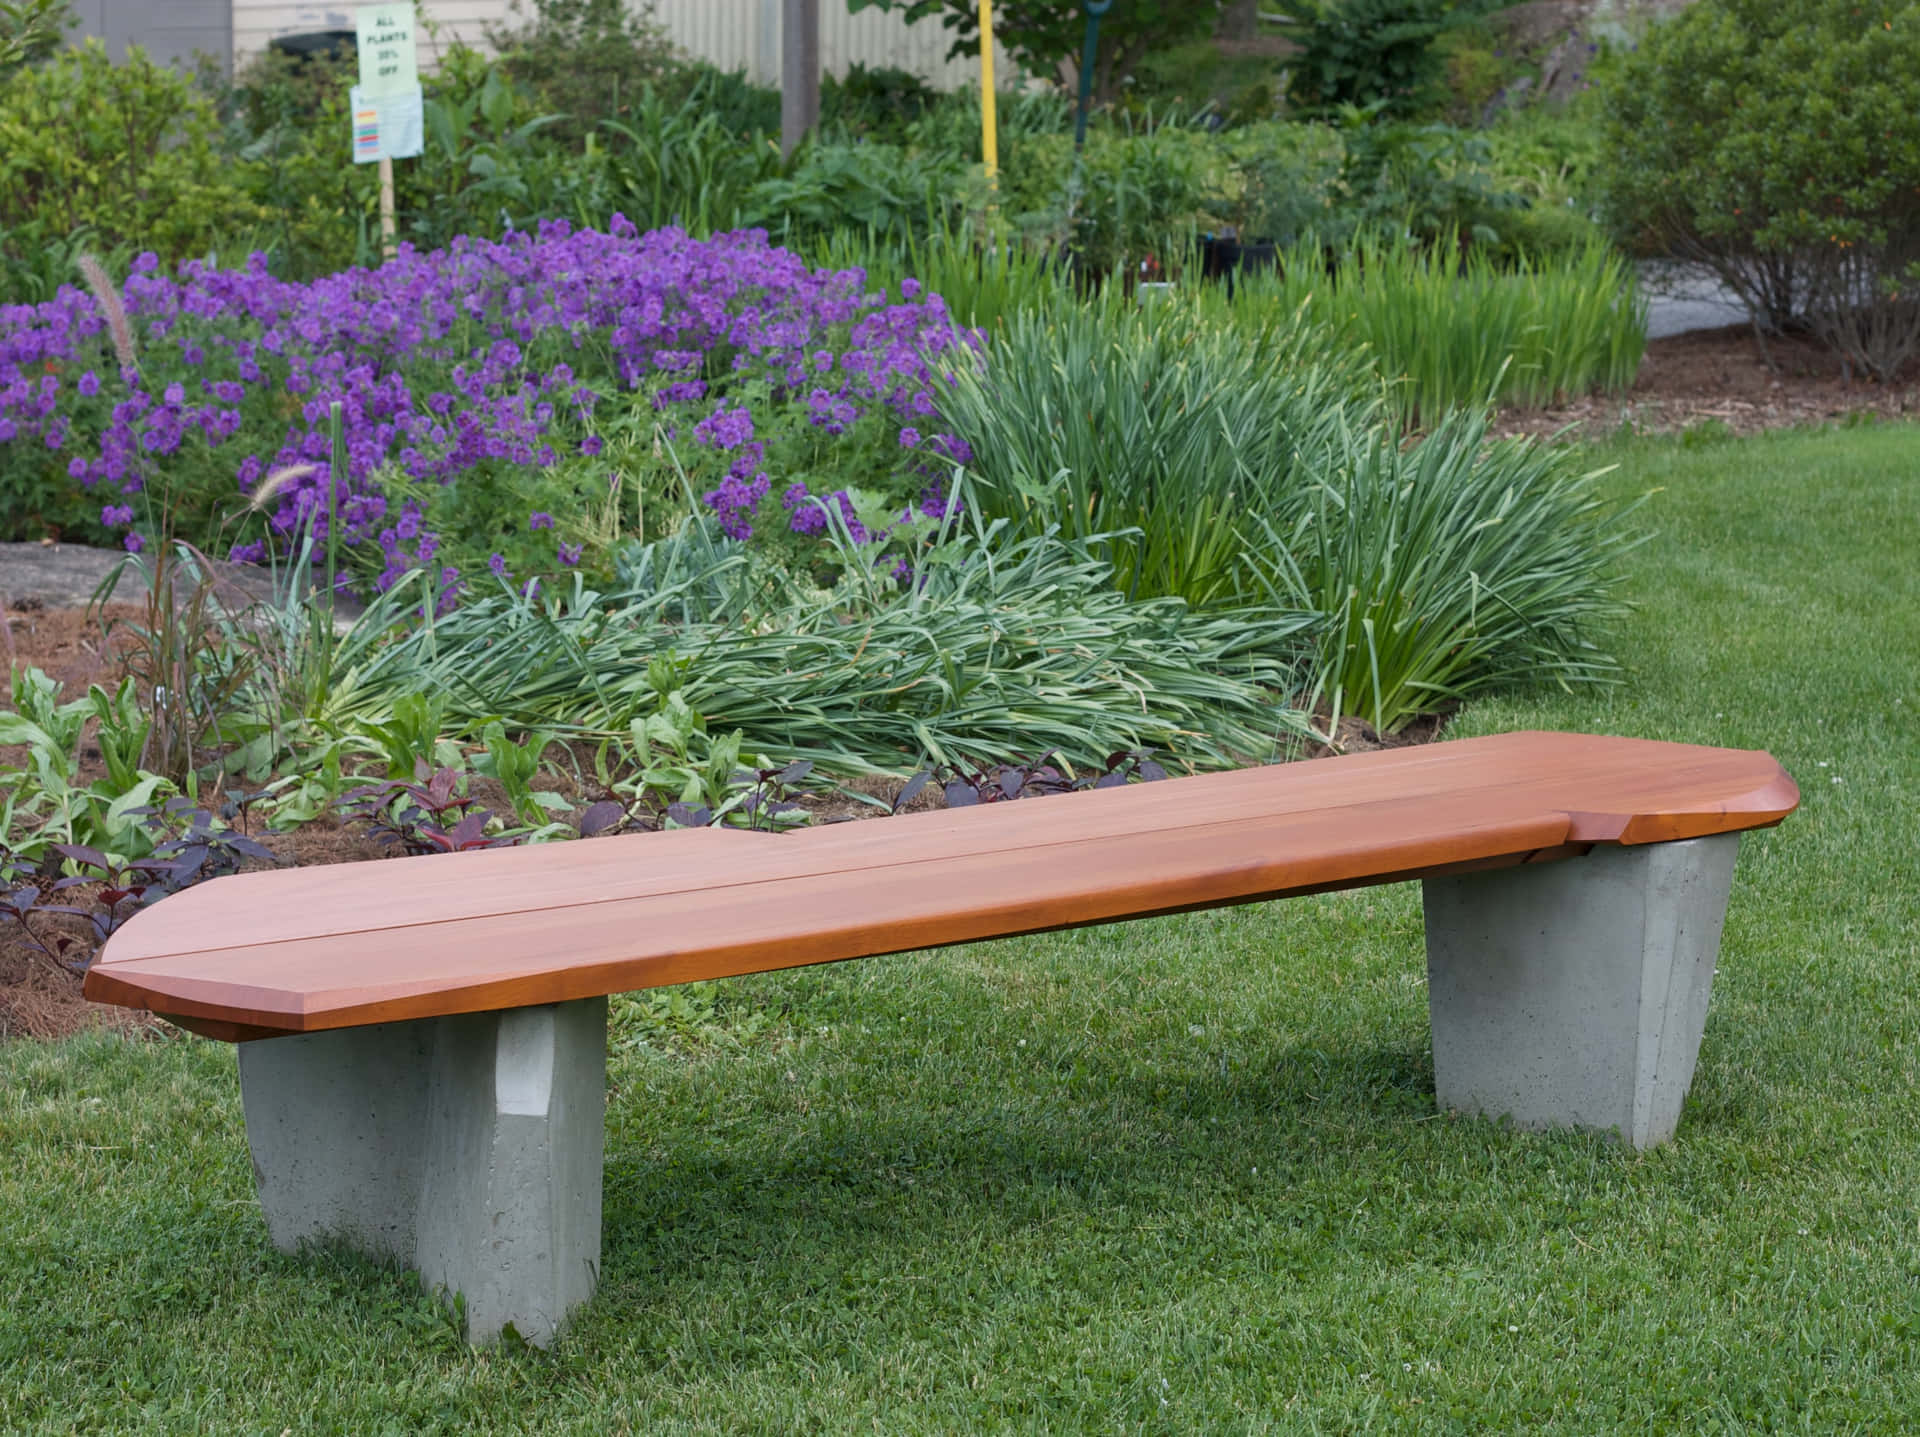 Take a break and relax with a bench